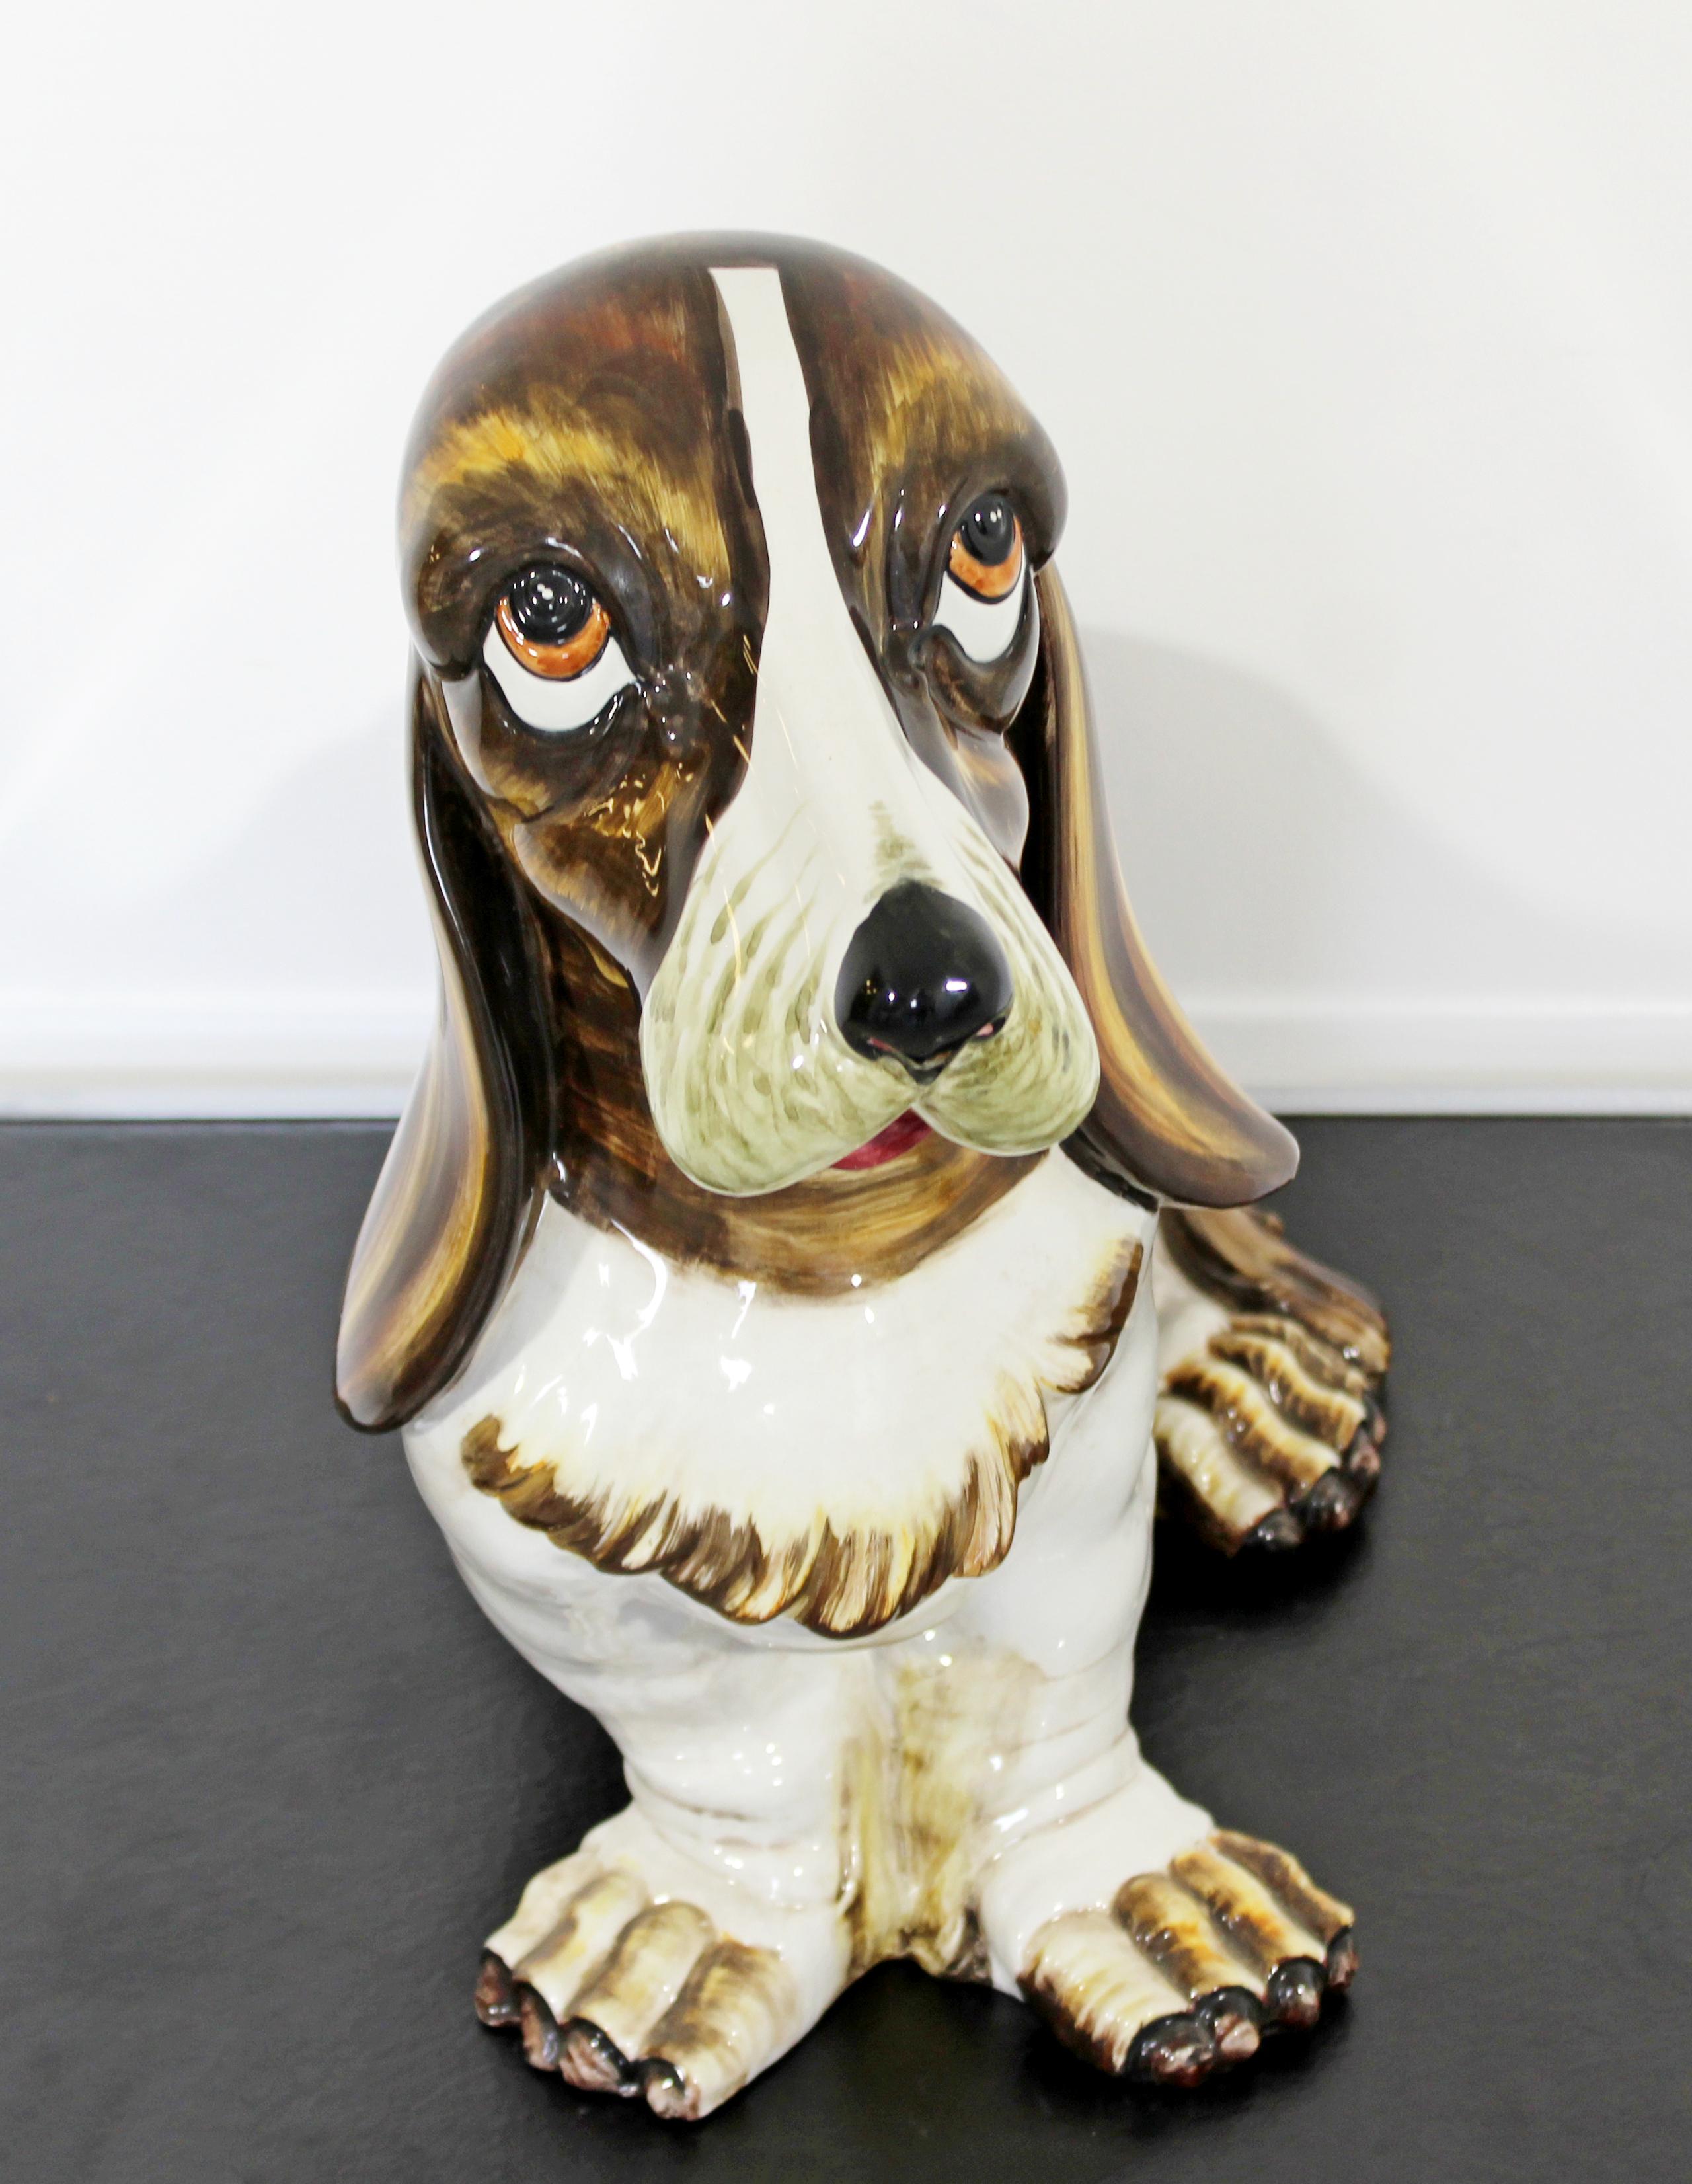 For your consideration is a gorgeous, ceramic sculpture of a life-sized Basset Hound, made in Italy, circa the 1950s. In excellent condition. The dimensions are 25